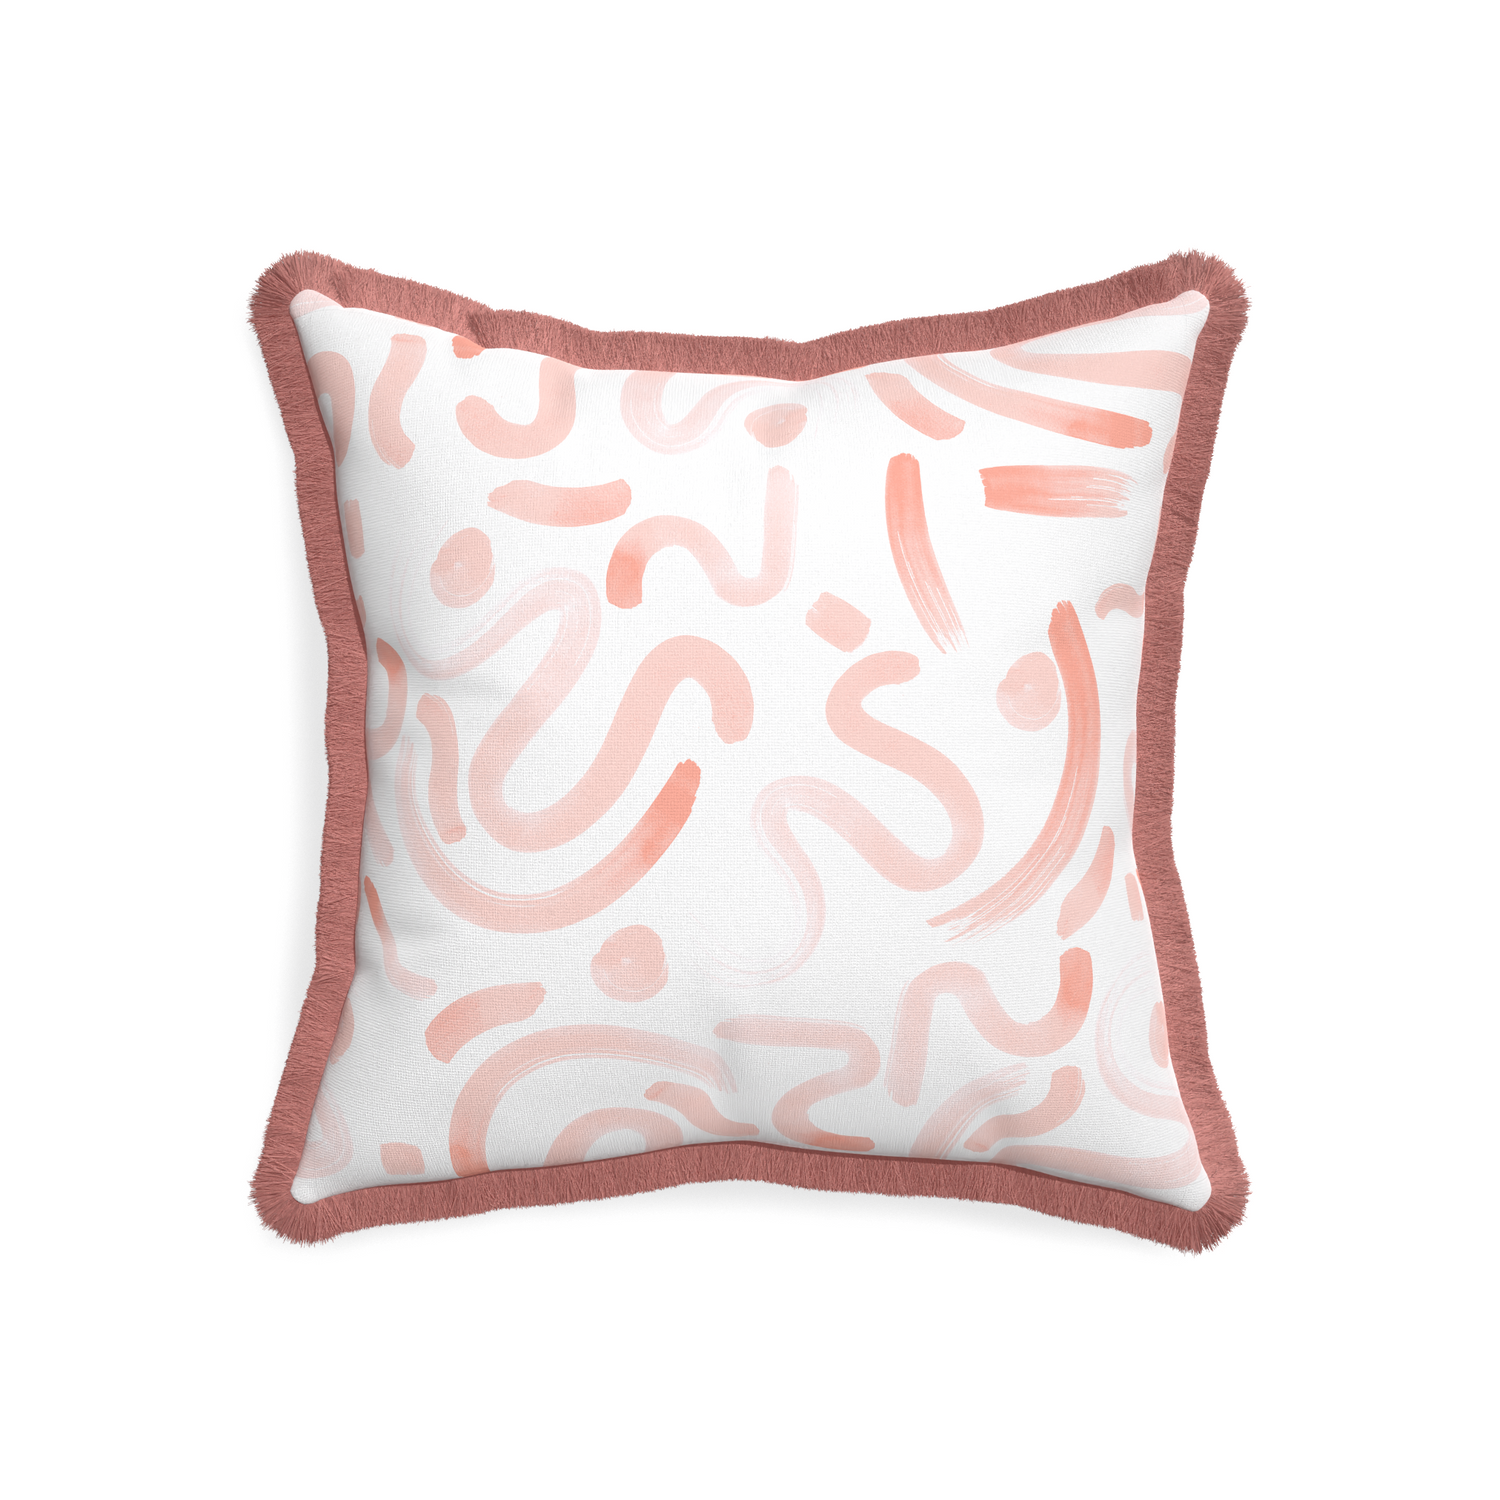 20-square hockney pink custom pink graphicpillow with d fringe on white background